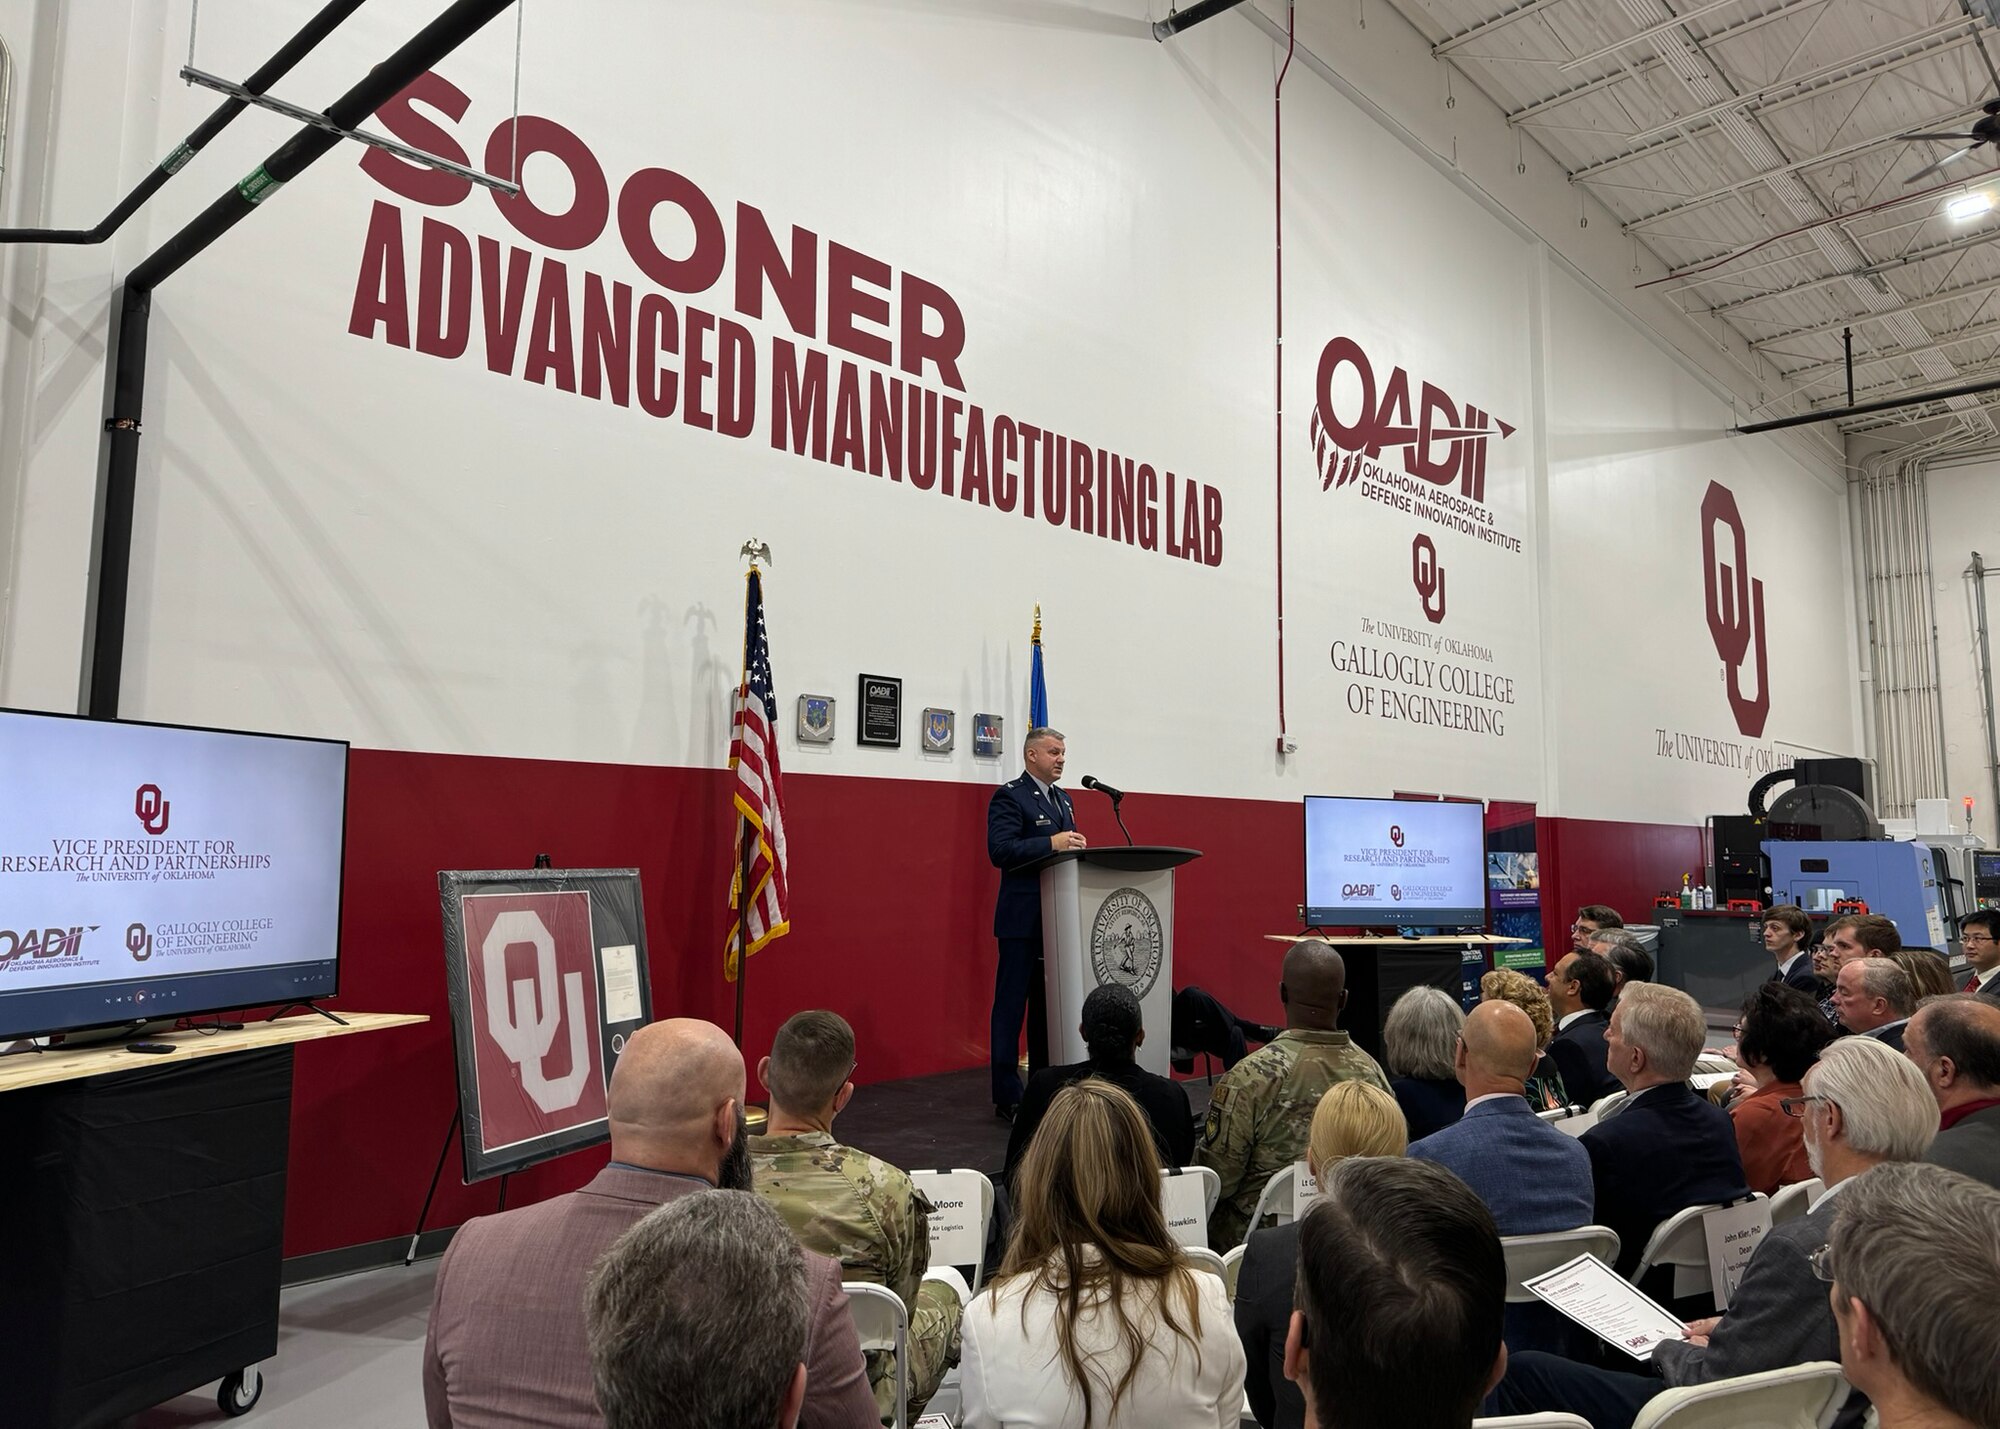 The University of Oklahoma officially opened the Sooner Advanced Manufacturing Lab during a grand opening event attended by government, military and defense industry leaders held Nov. 28.